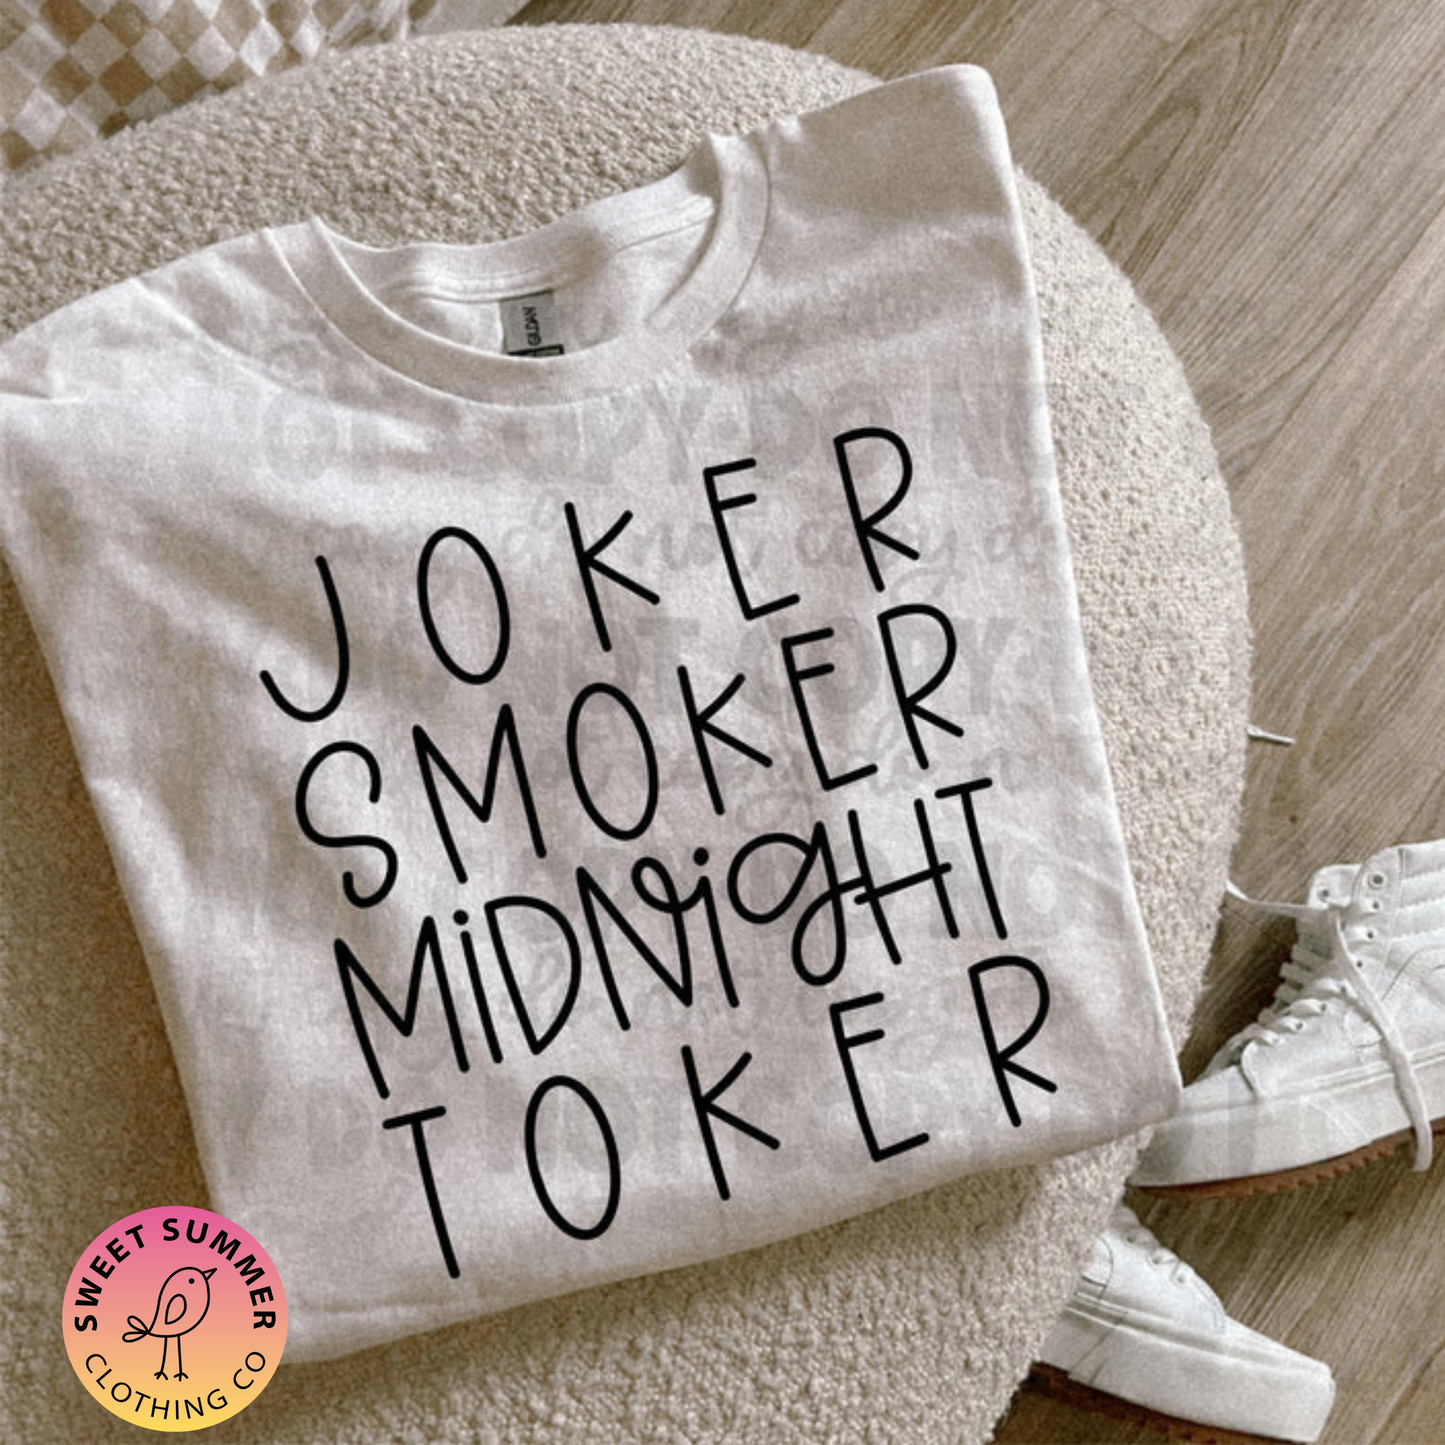 Midnight Toker Graphic T-Shirt or Crewneck - Get Your Groove On!